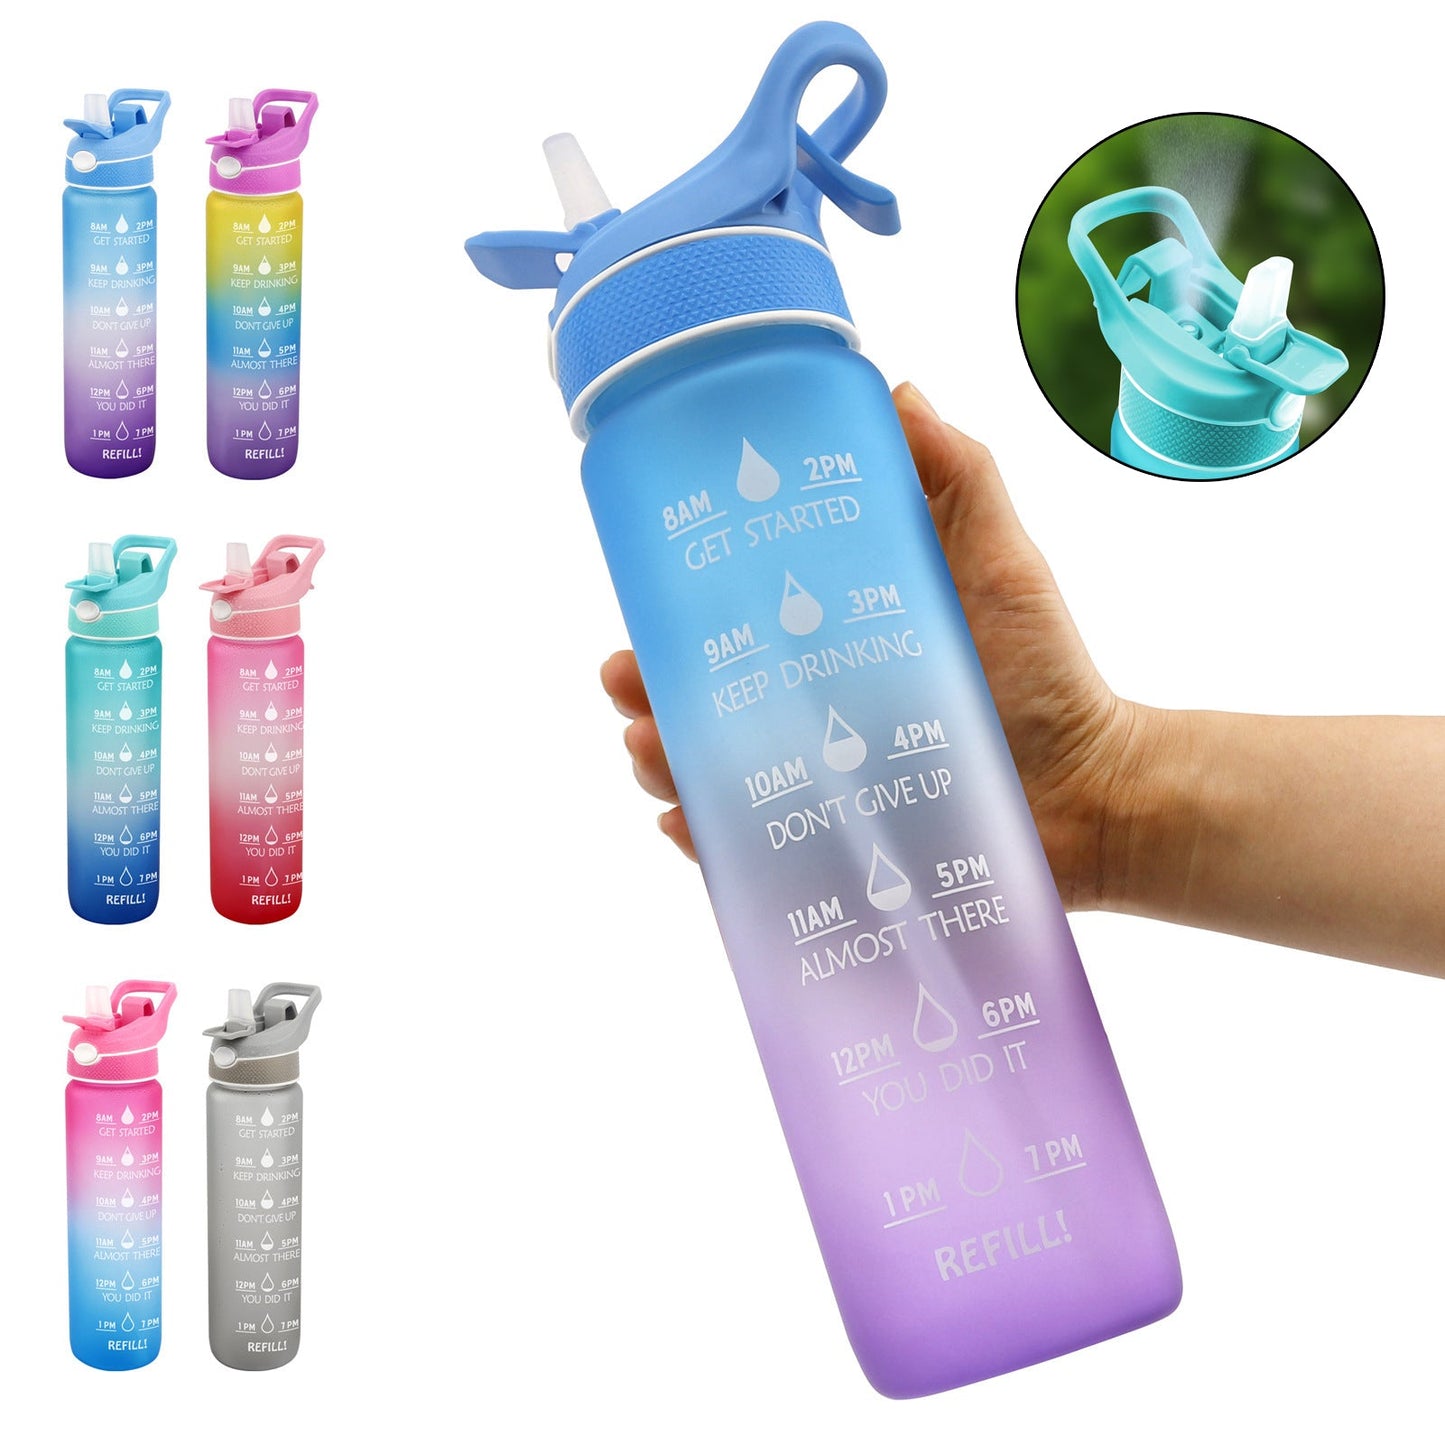 "1000ml SprayDrink Water Bottle with Cooling Mister - Stay Hydrated On-the-Go"